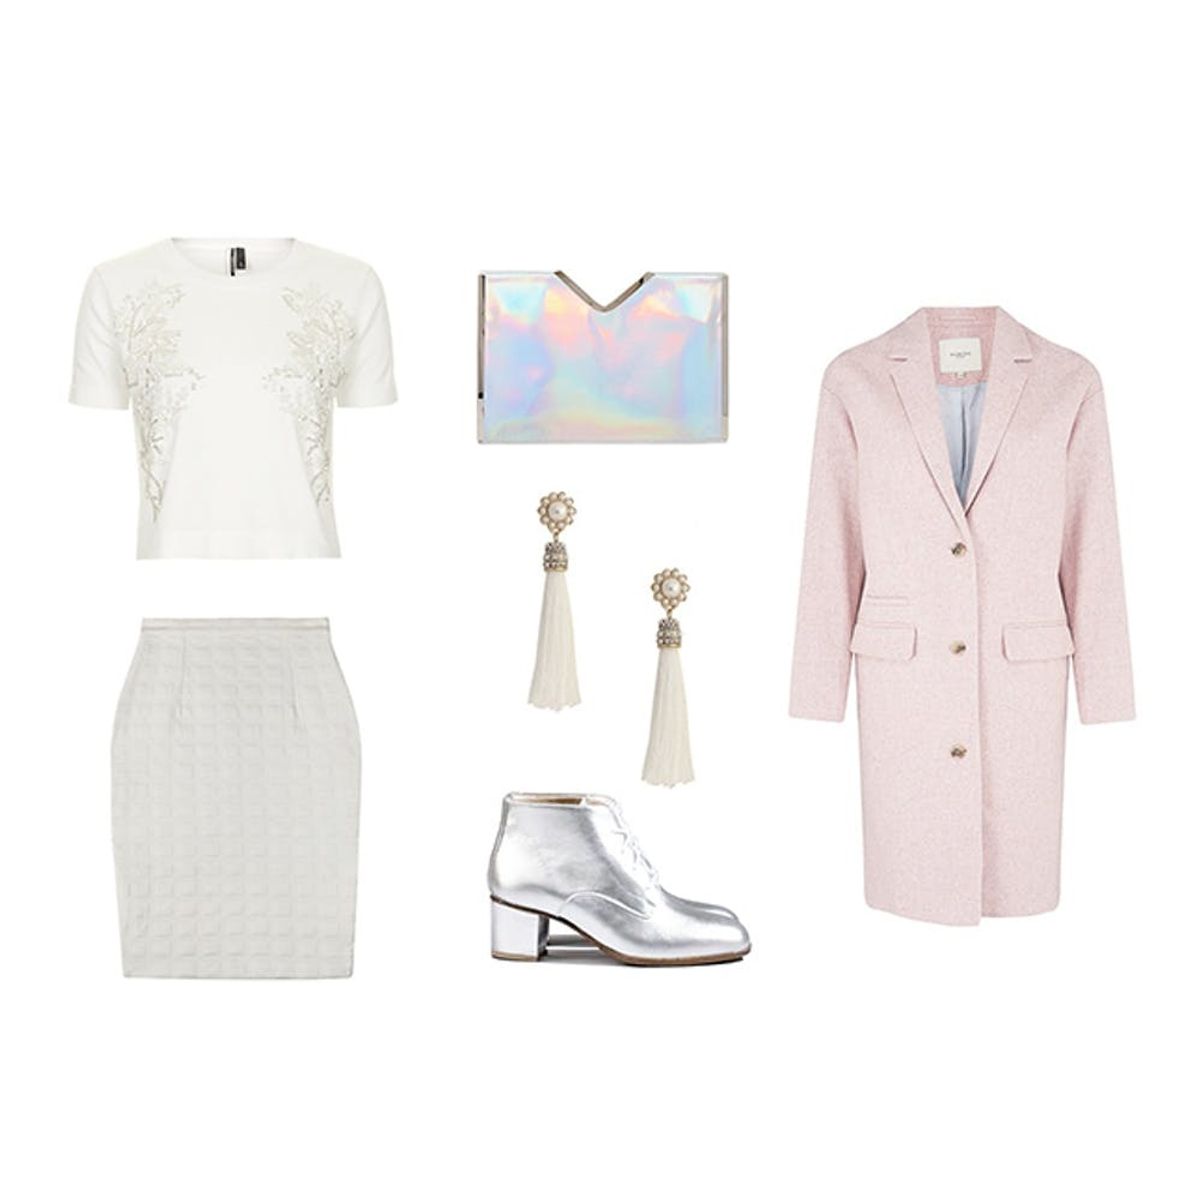 Spring 2015 Trends to Try: How to Wear White All Day